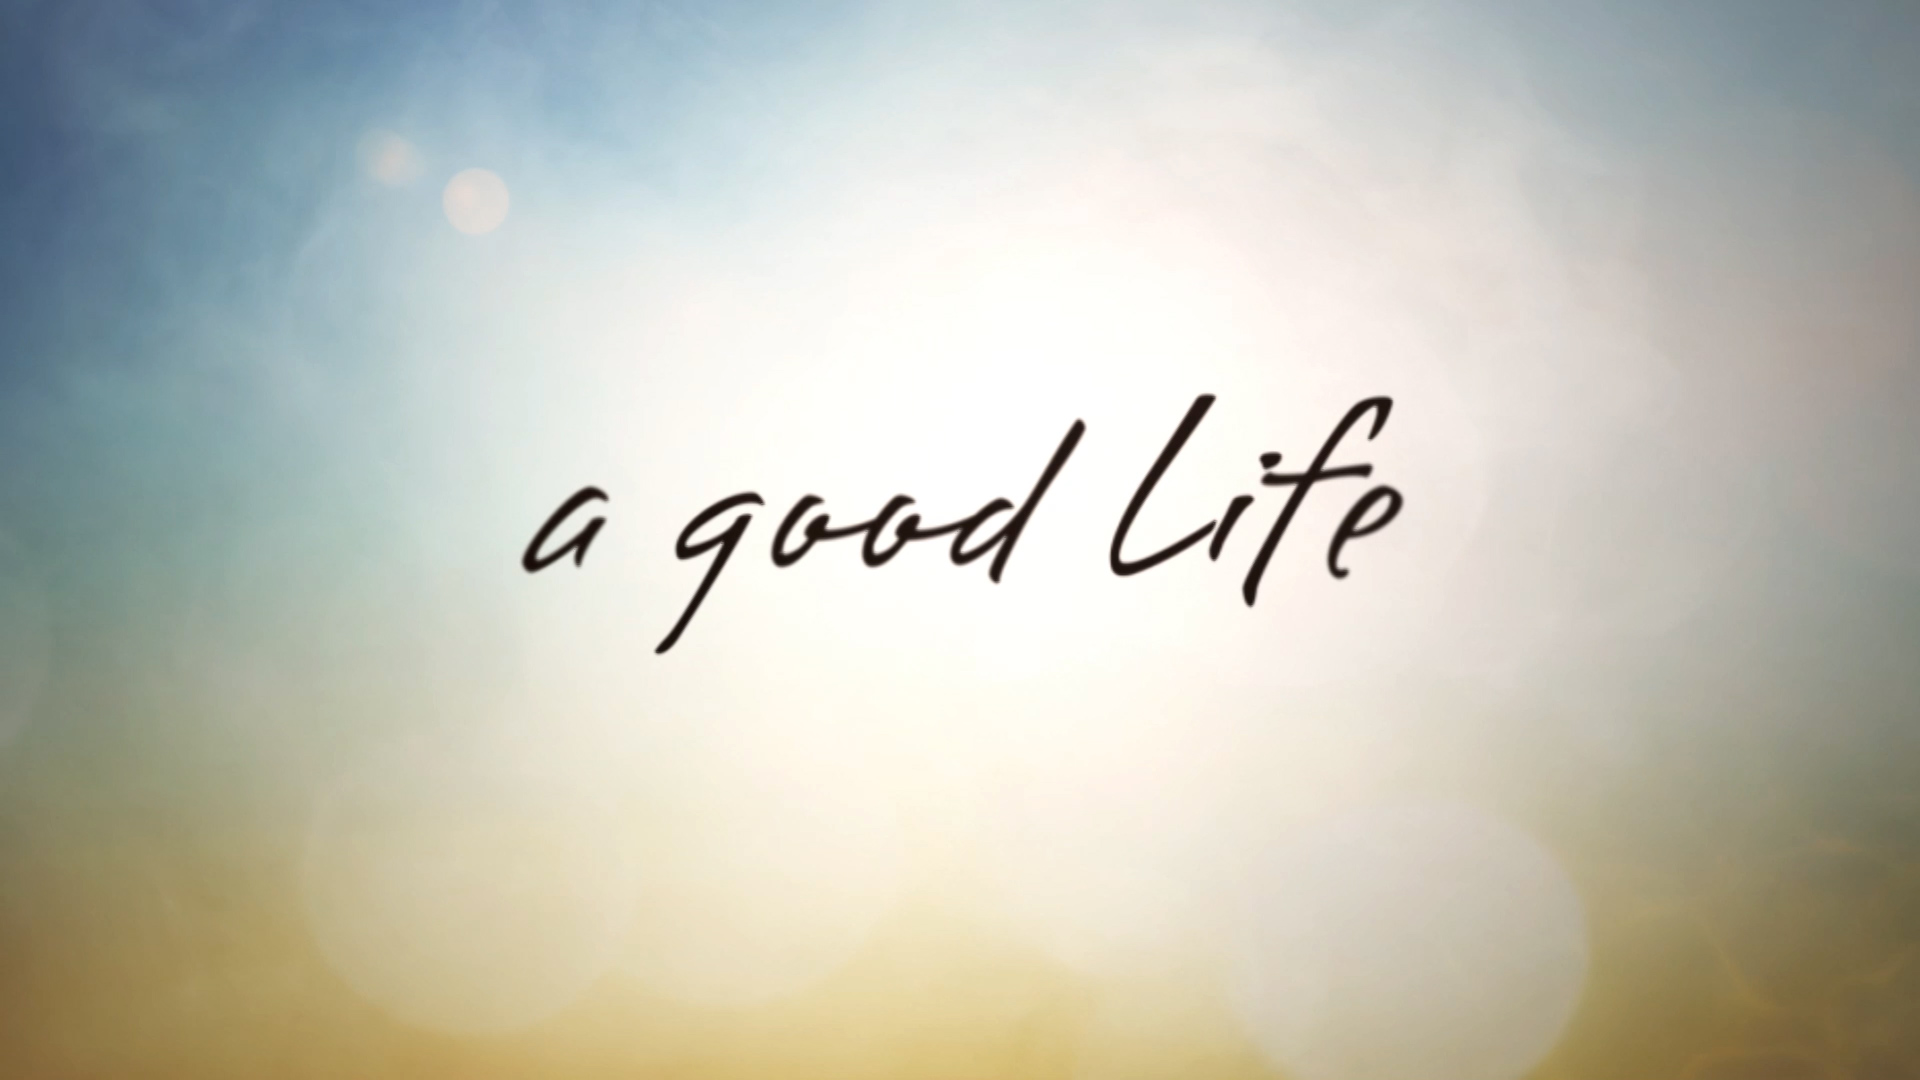 Glowing yellow background with Black type over top that reads: a good life